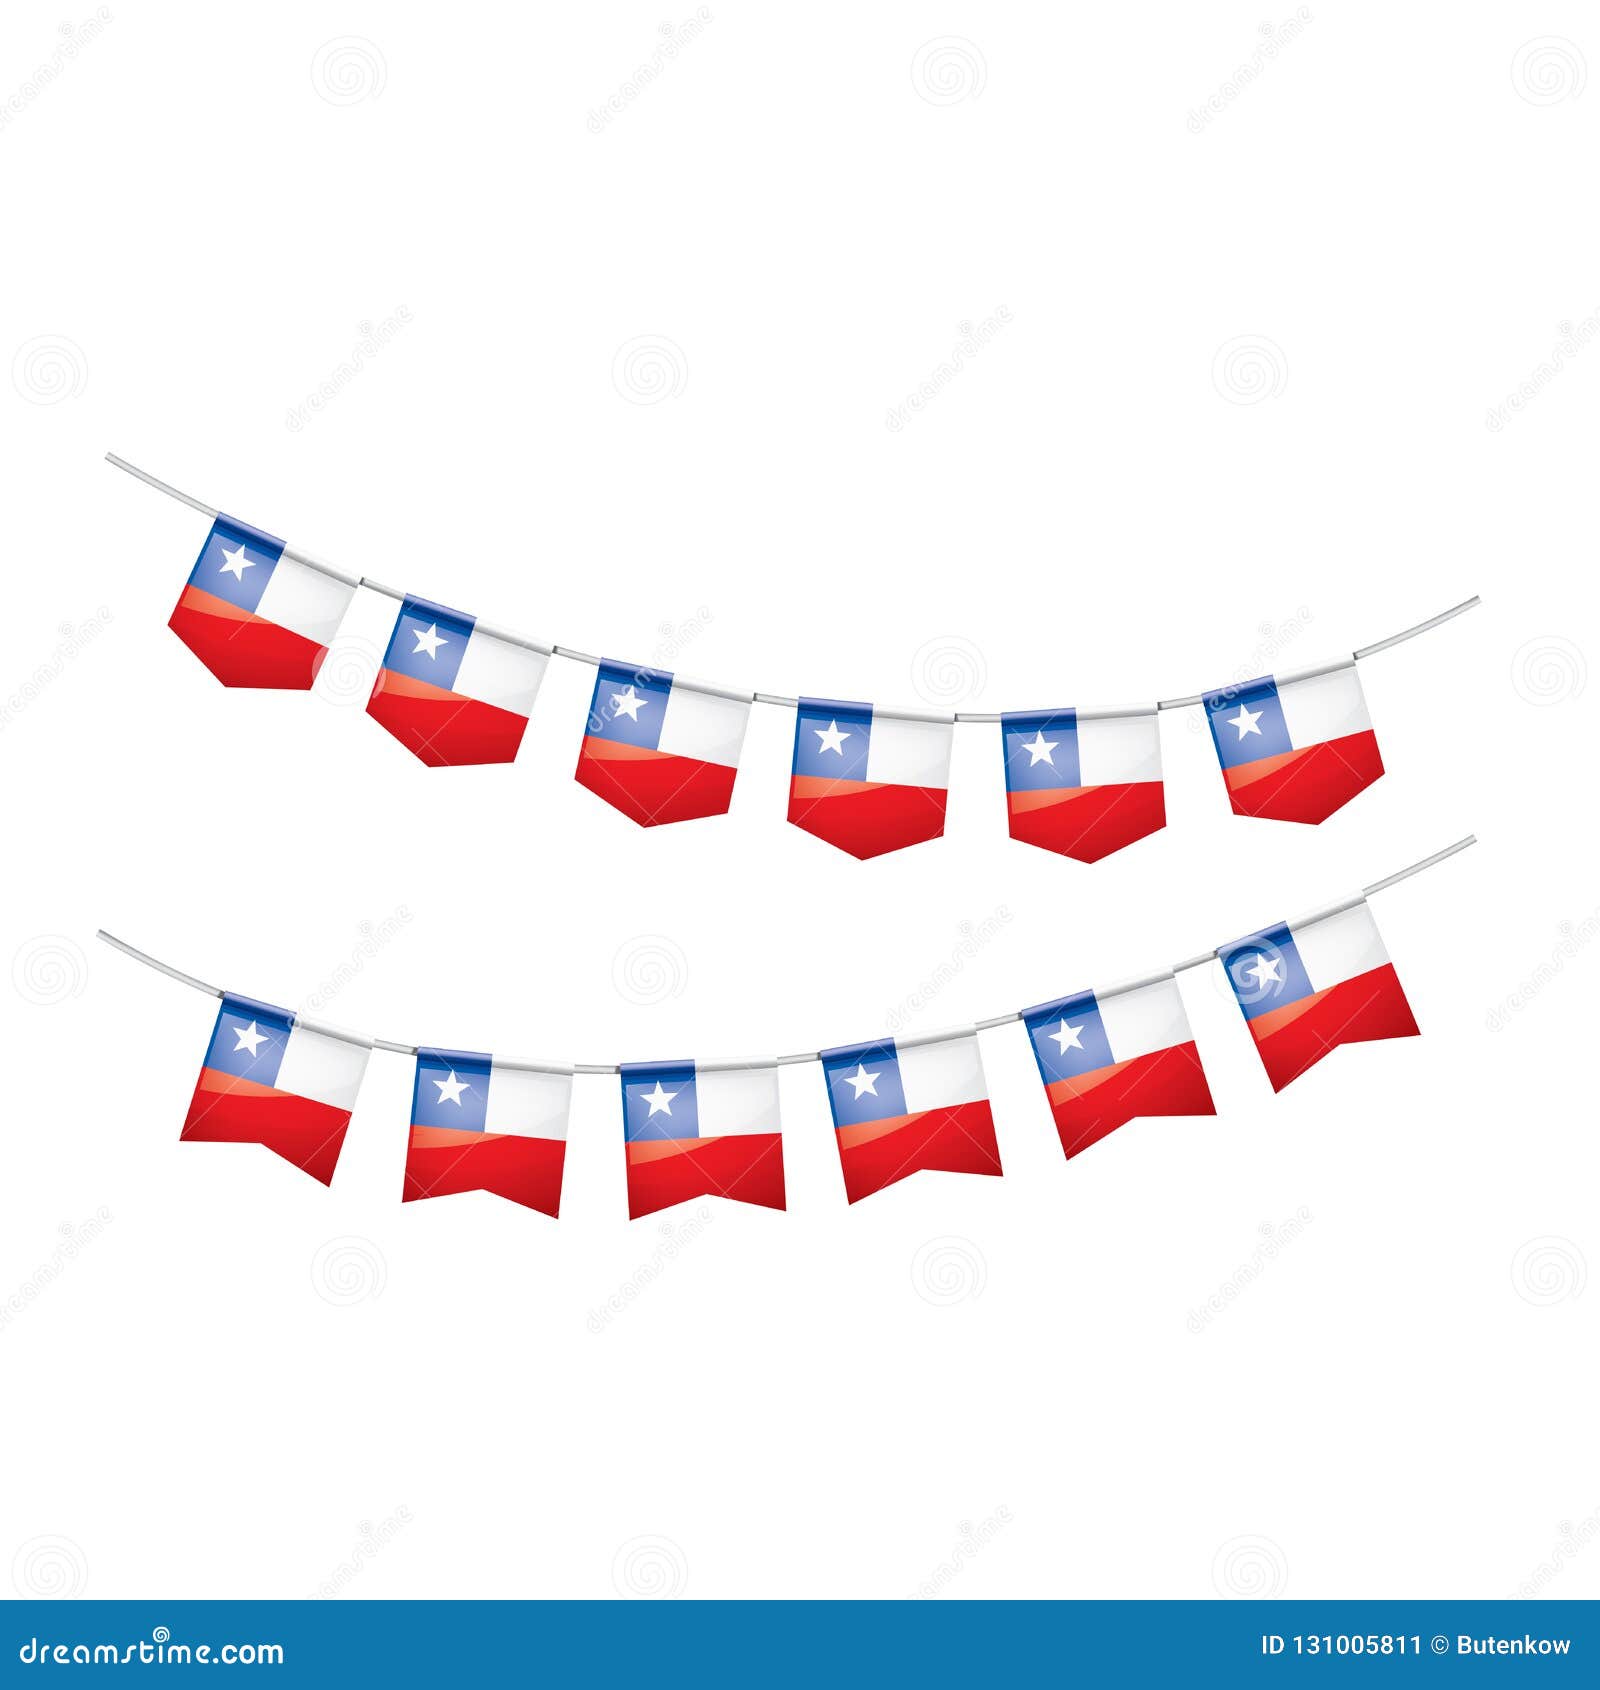 Chile Flag Vector Illustration On A White Background Stock Vector